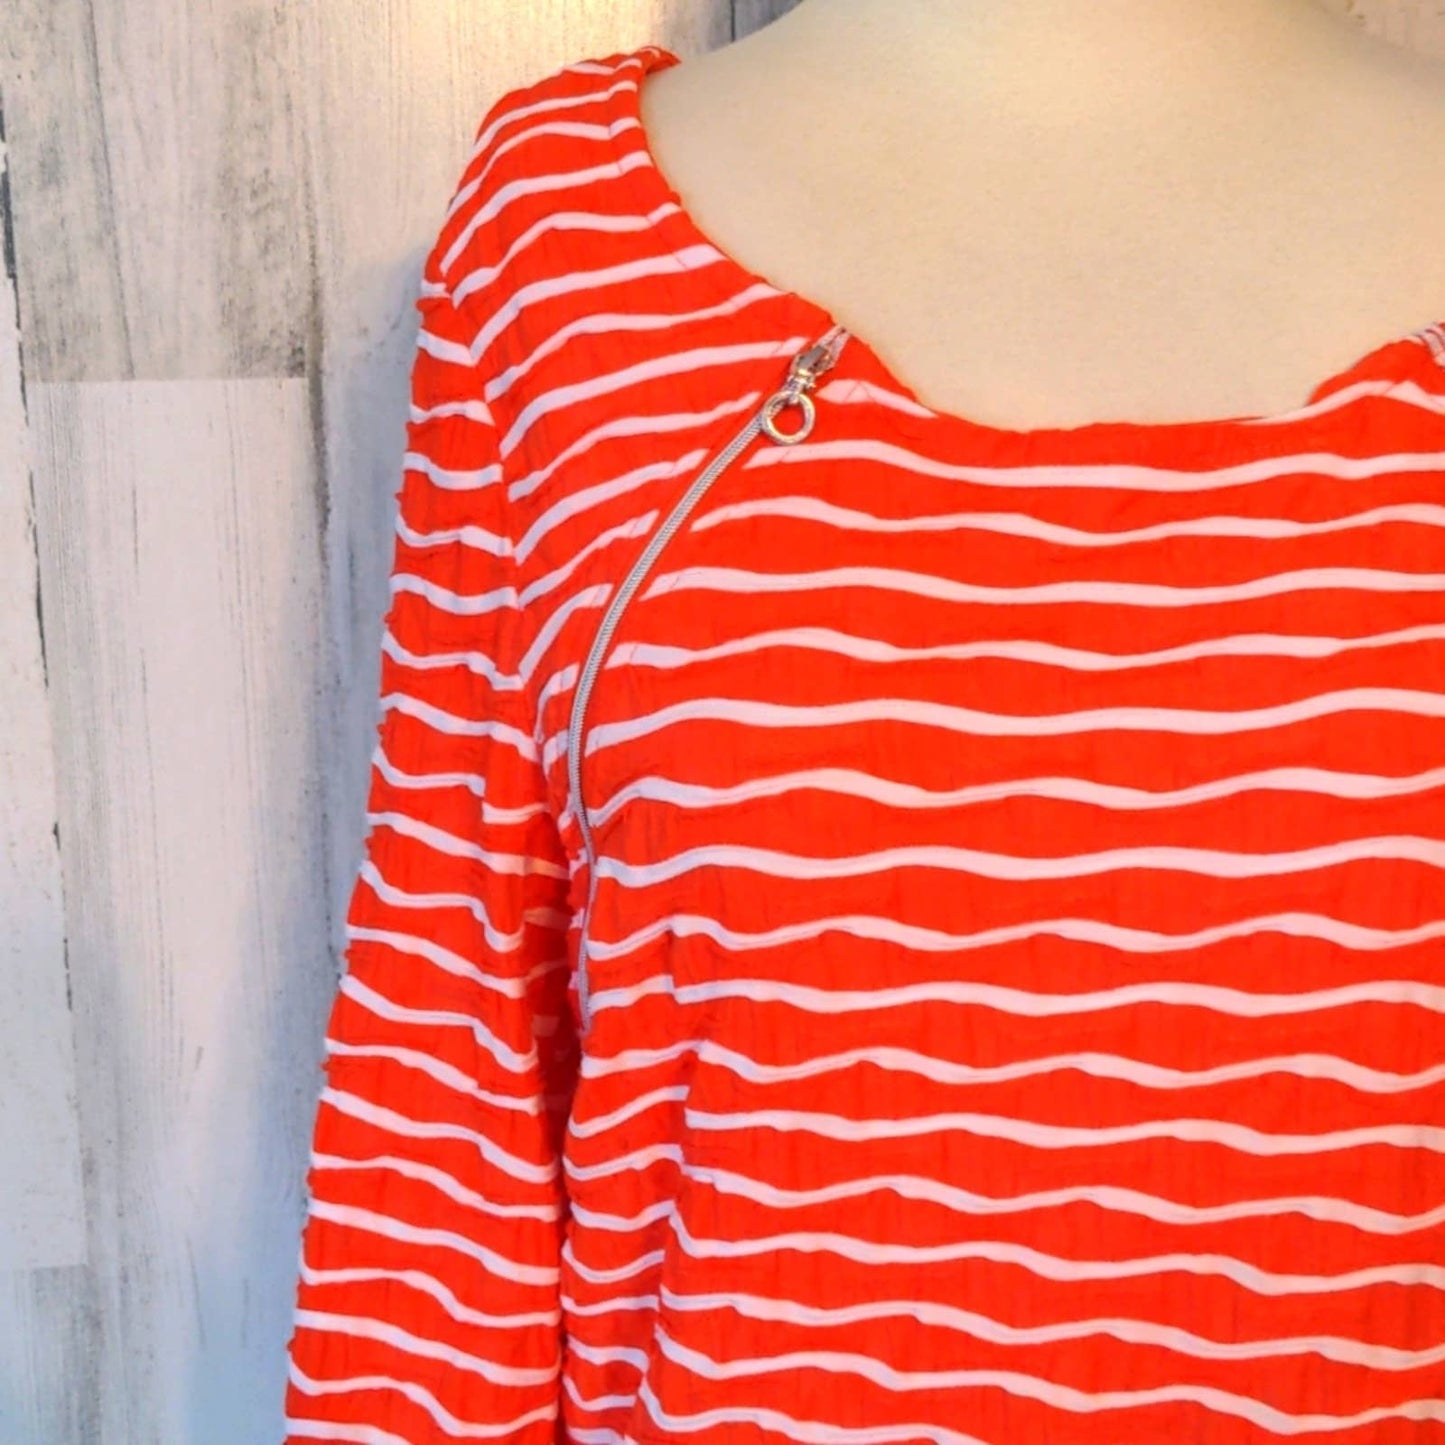 ONQUE CASUAL Orange Striped Textured Zipper Top Large NEW